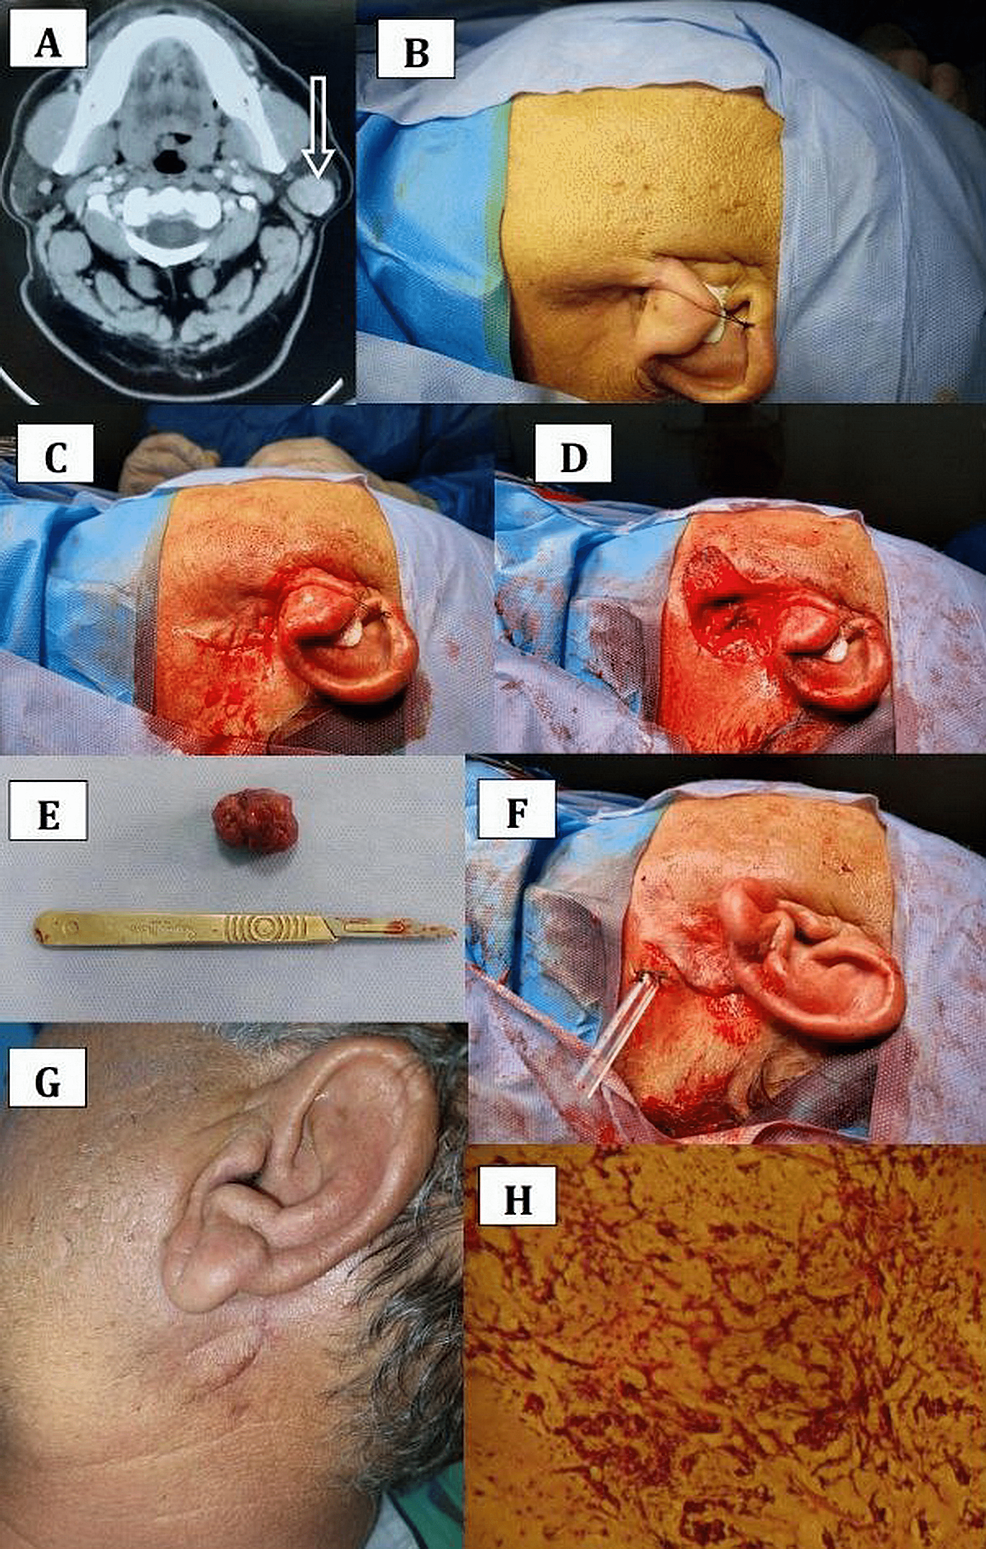 (A)-Axial-CT-revealing-(arrow)-a-mass-4-×-2.5-cm-in-the-left-parotid-gland.-(B)-Preoperative-view-and-site-prepared-for-surgery.-(C)-Incision.-(D)-Superficial-parotidectomy-done-with-preservation-of-the-facial-nerve.-(E)-Surgical-specimen-of-the-tumor.-(F)-Wound-closure-with-drain-placement.-(G)-Postoperative-view-four-weeks-after-the-surgery.-(H)-Histopathological-confirmation-(H&E-stain,-100×)-of-pleomorphic-adenoma.